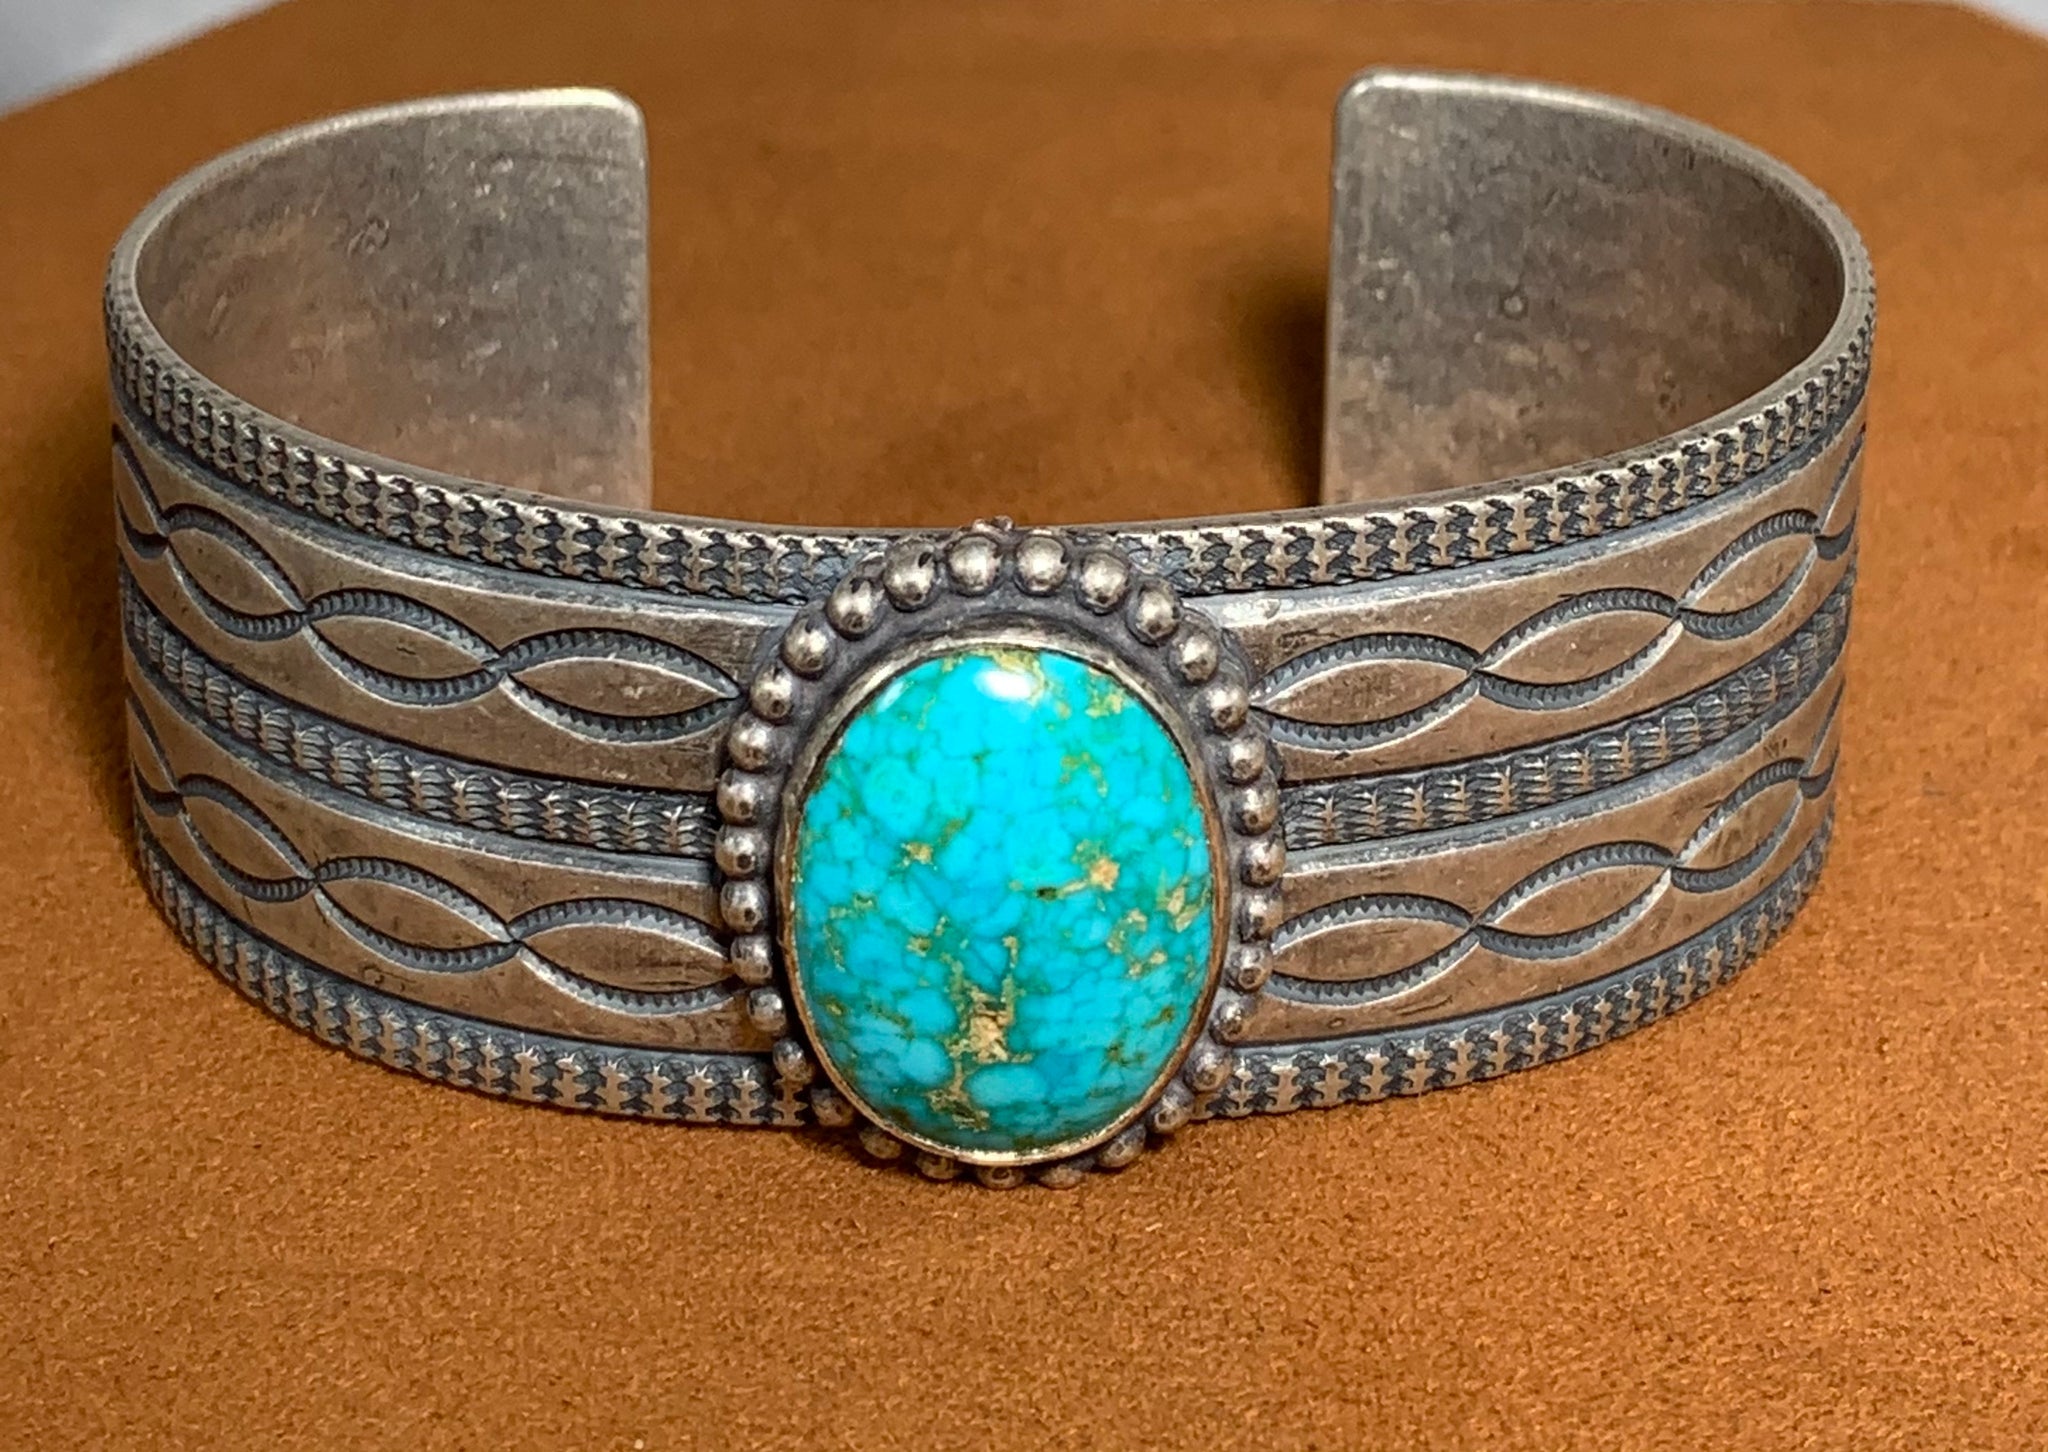 Large Turquoise Stone Cuff by Don Lucas